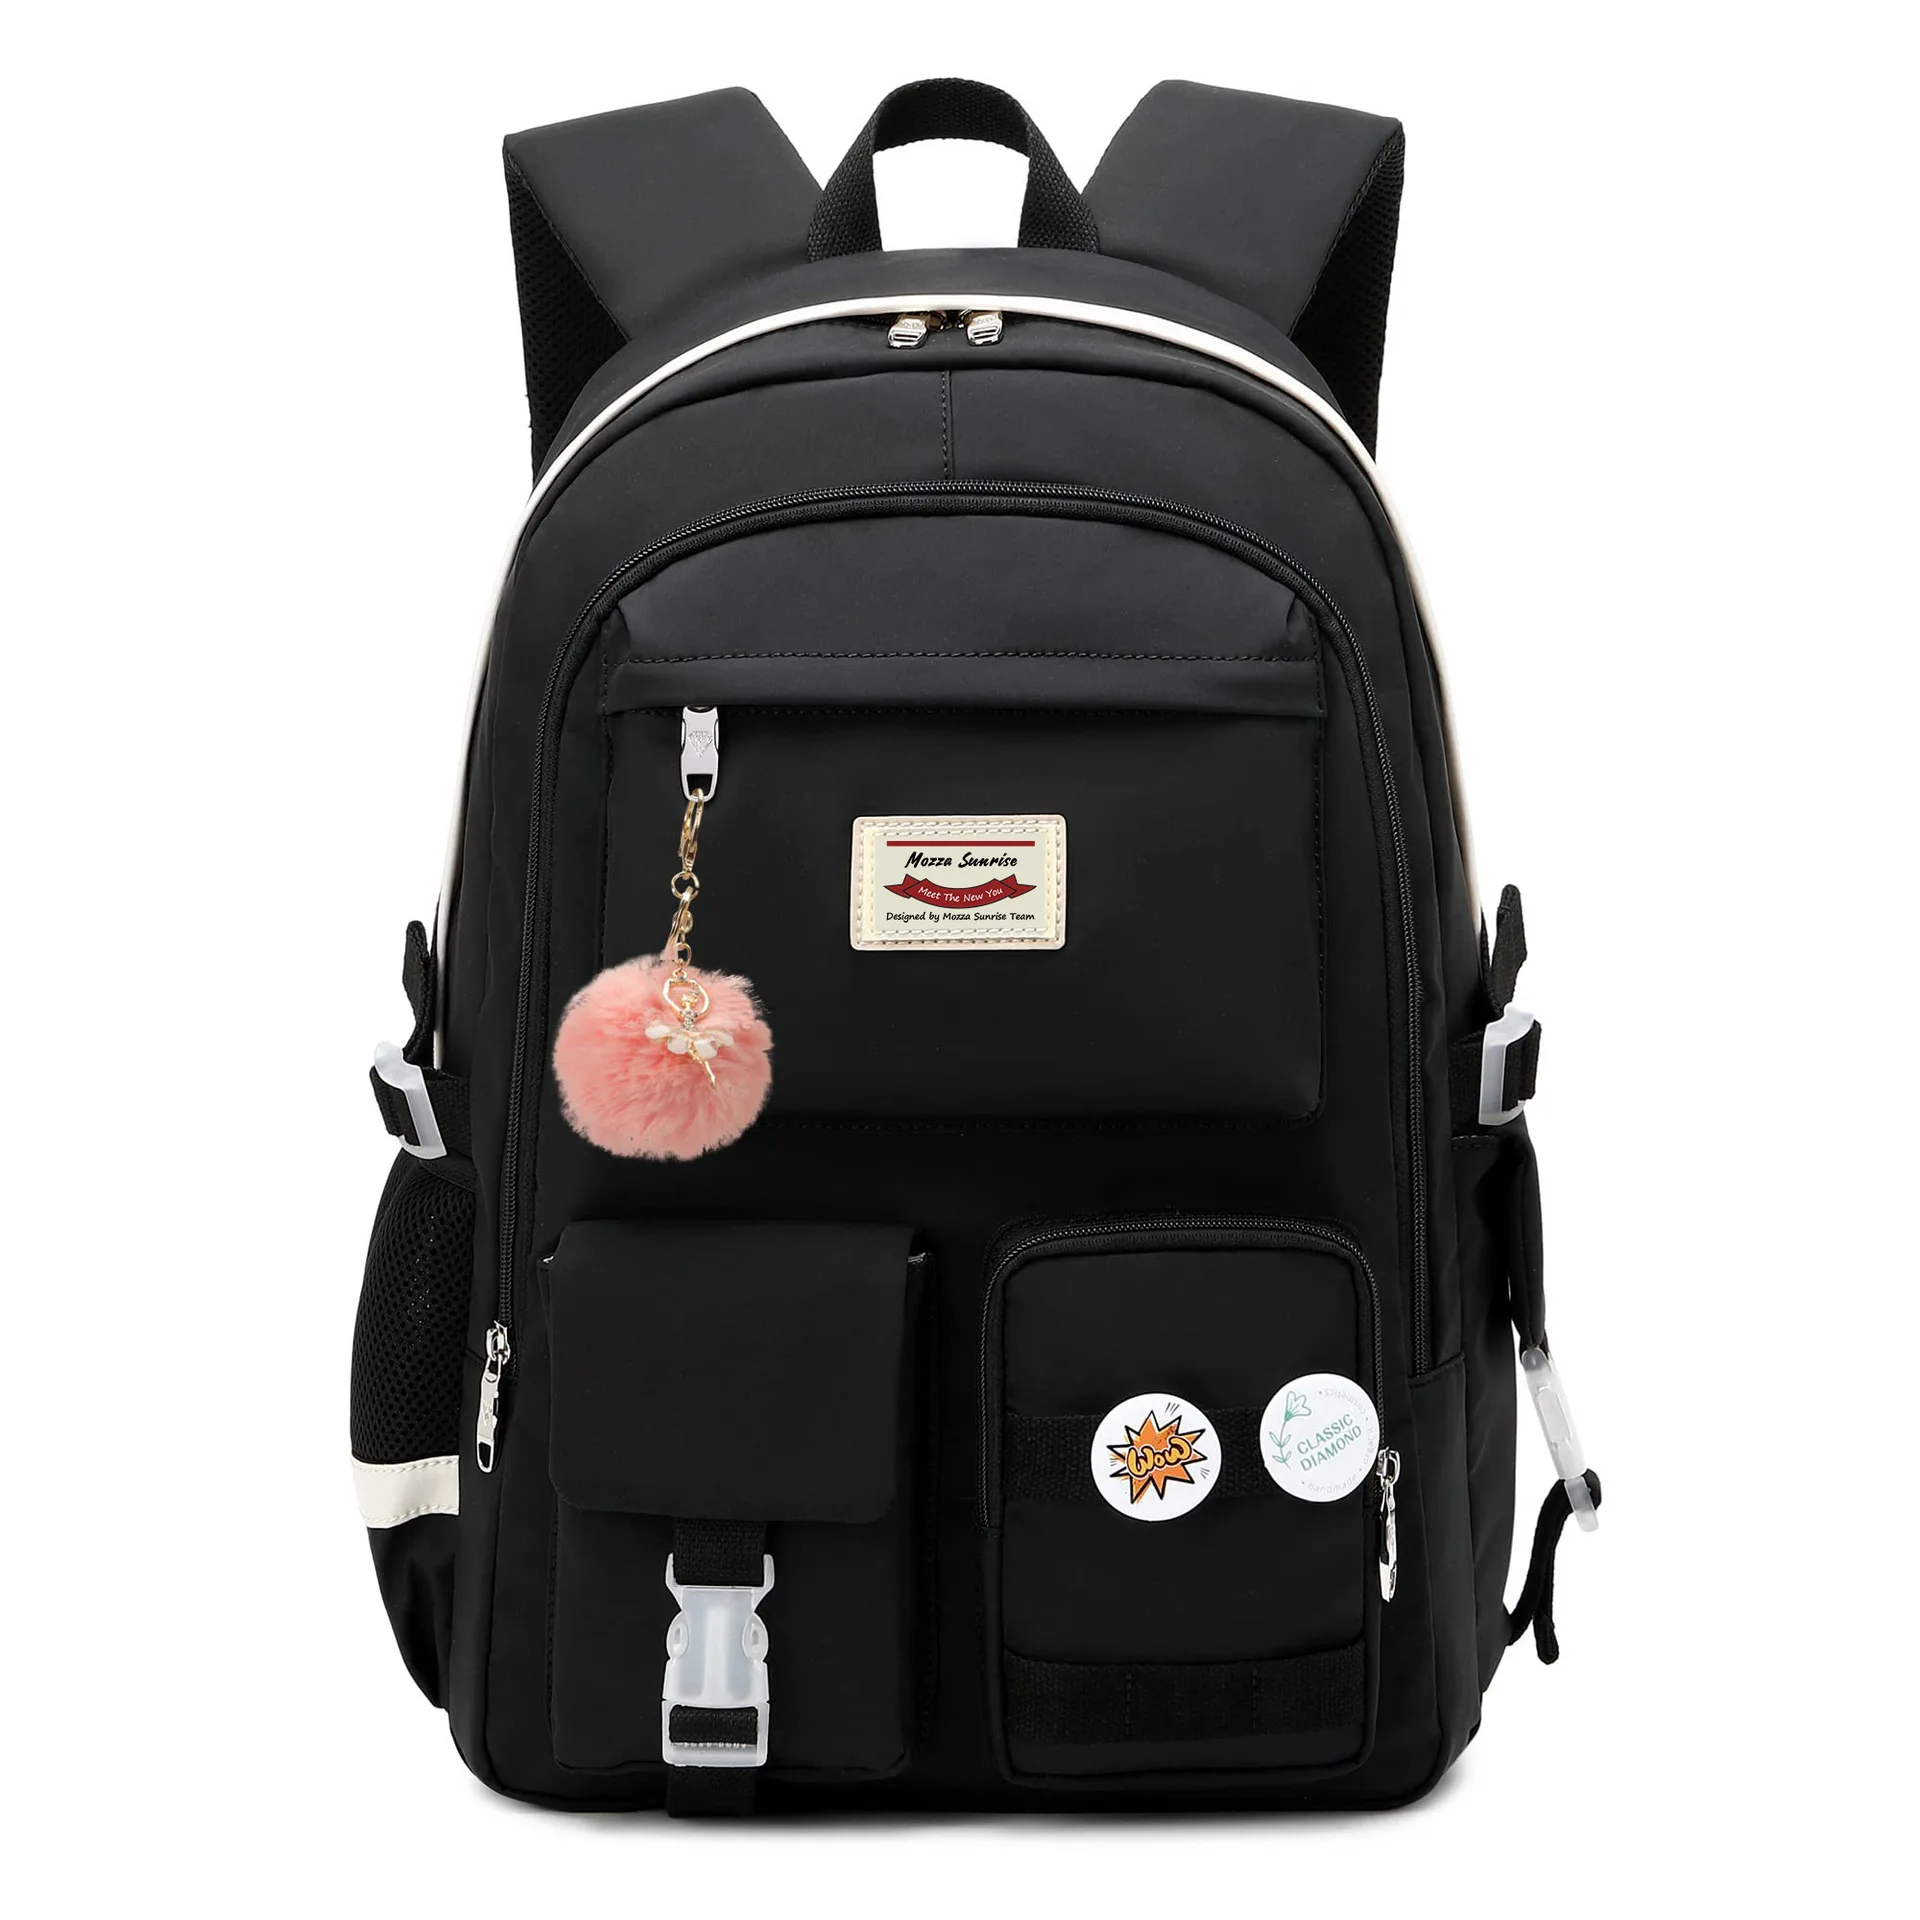 Backpack Female middle school student high school bag large capacity backpack college student computer bag